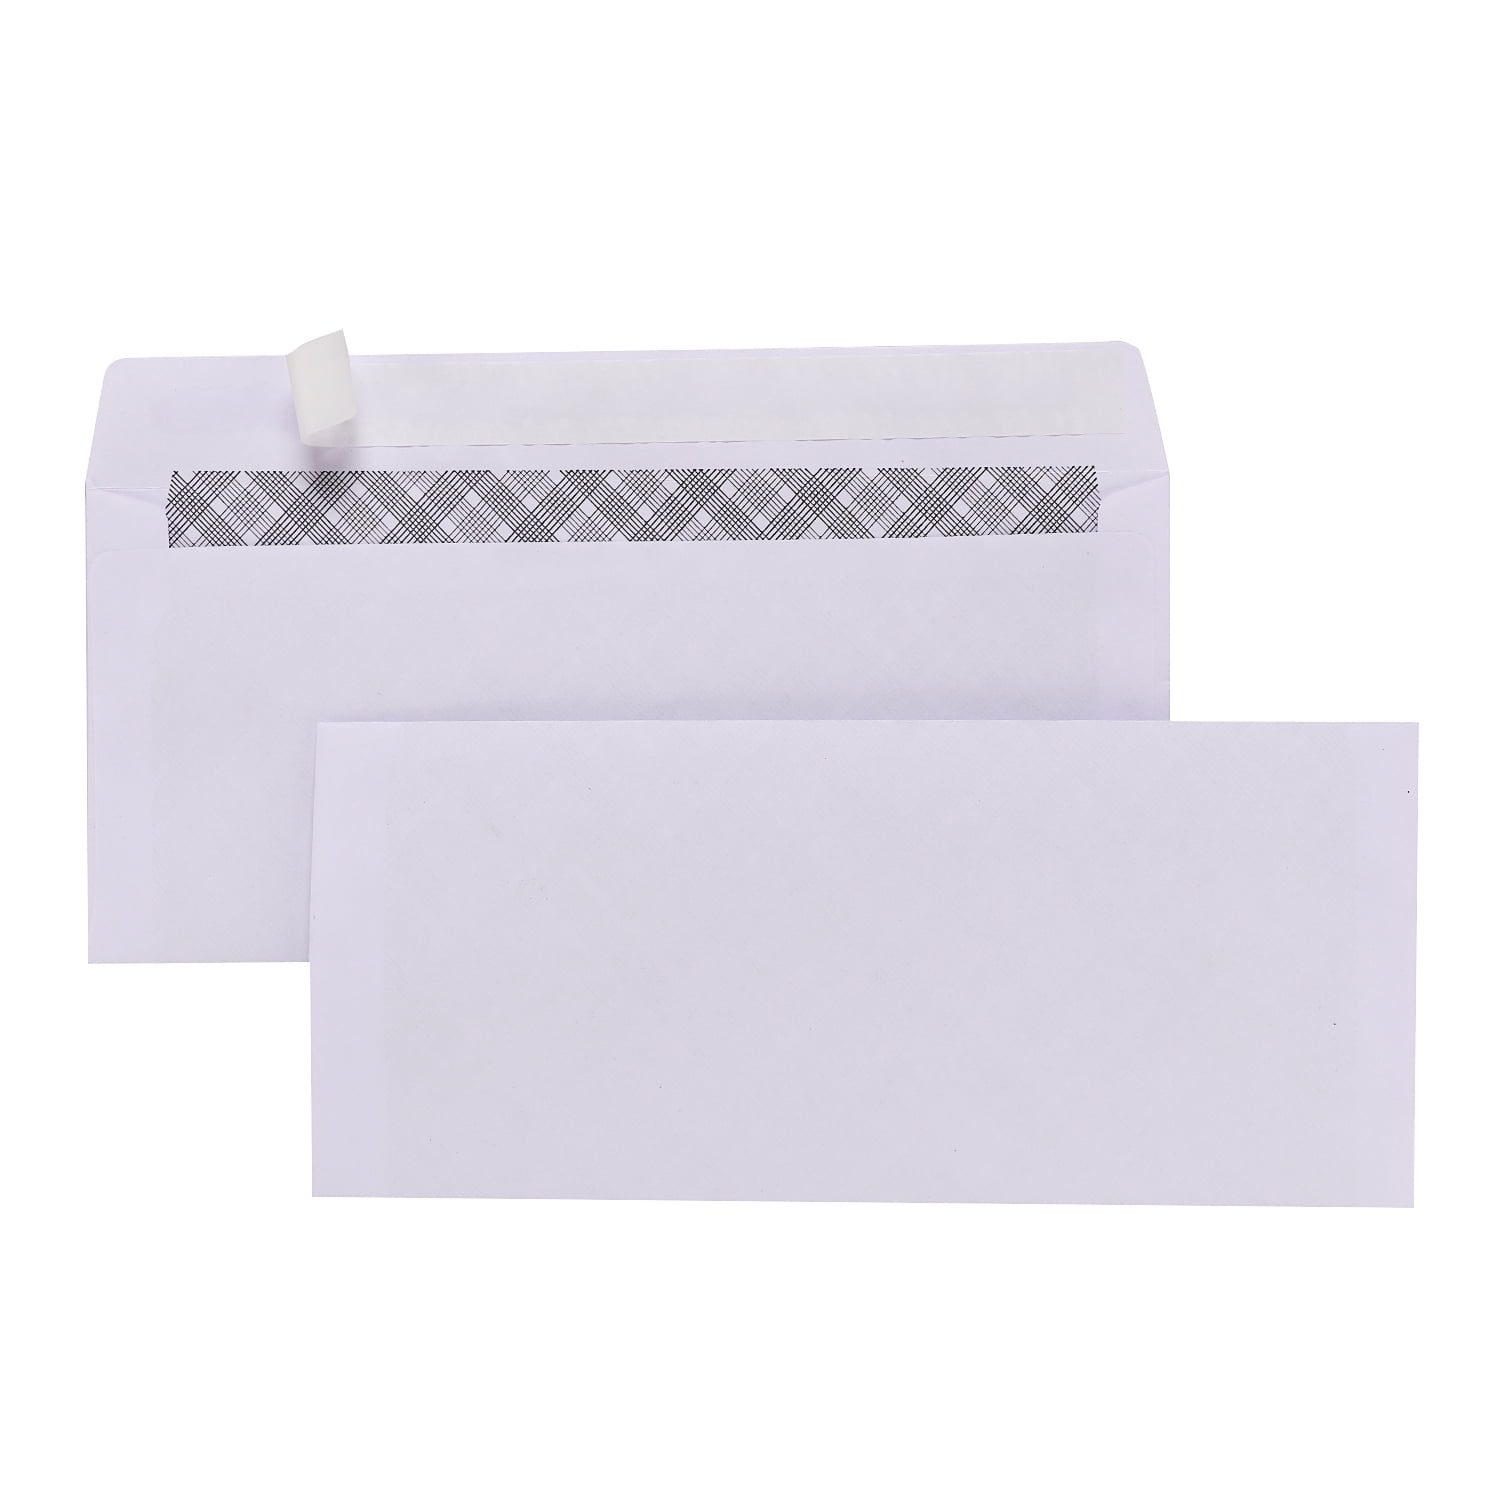 Pen Gear #6 3/4 Business Envelopes 3 5/8"x6 1/2" White Peel and Stick & Security 